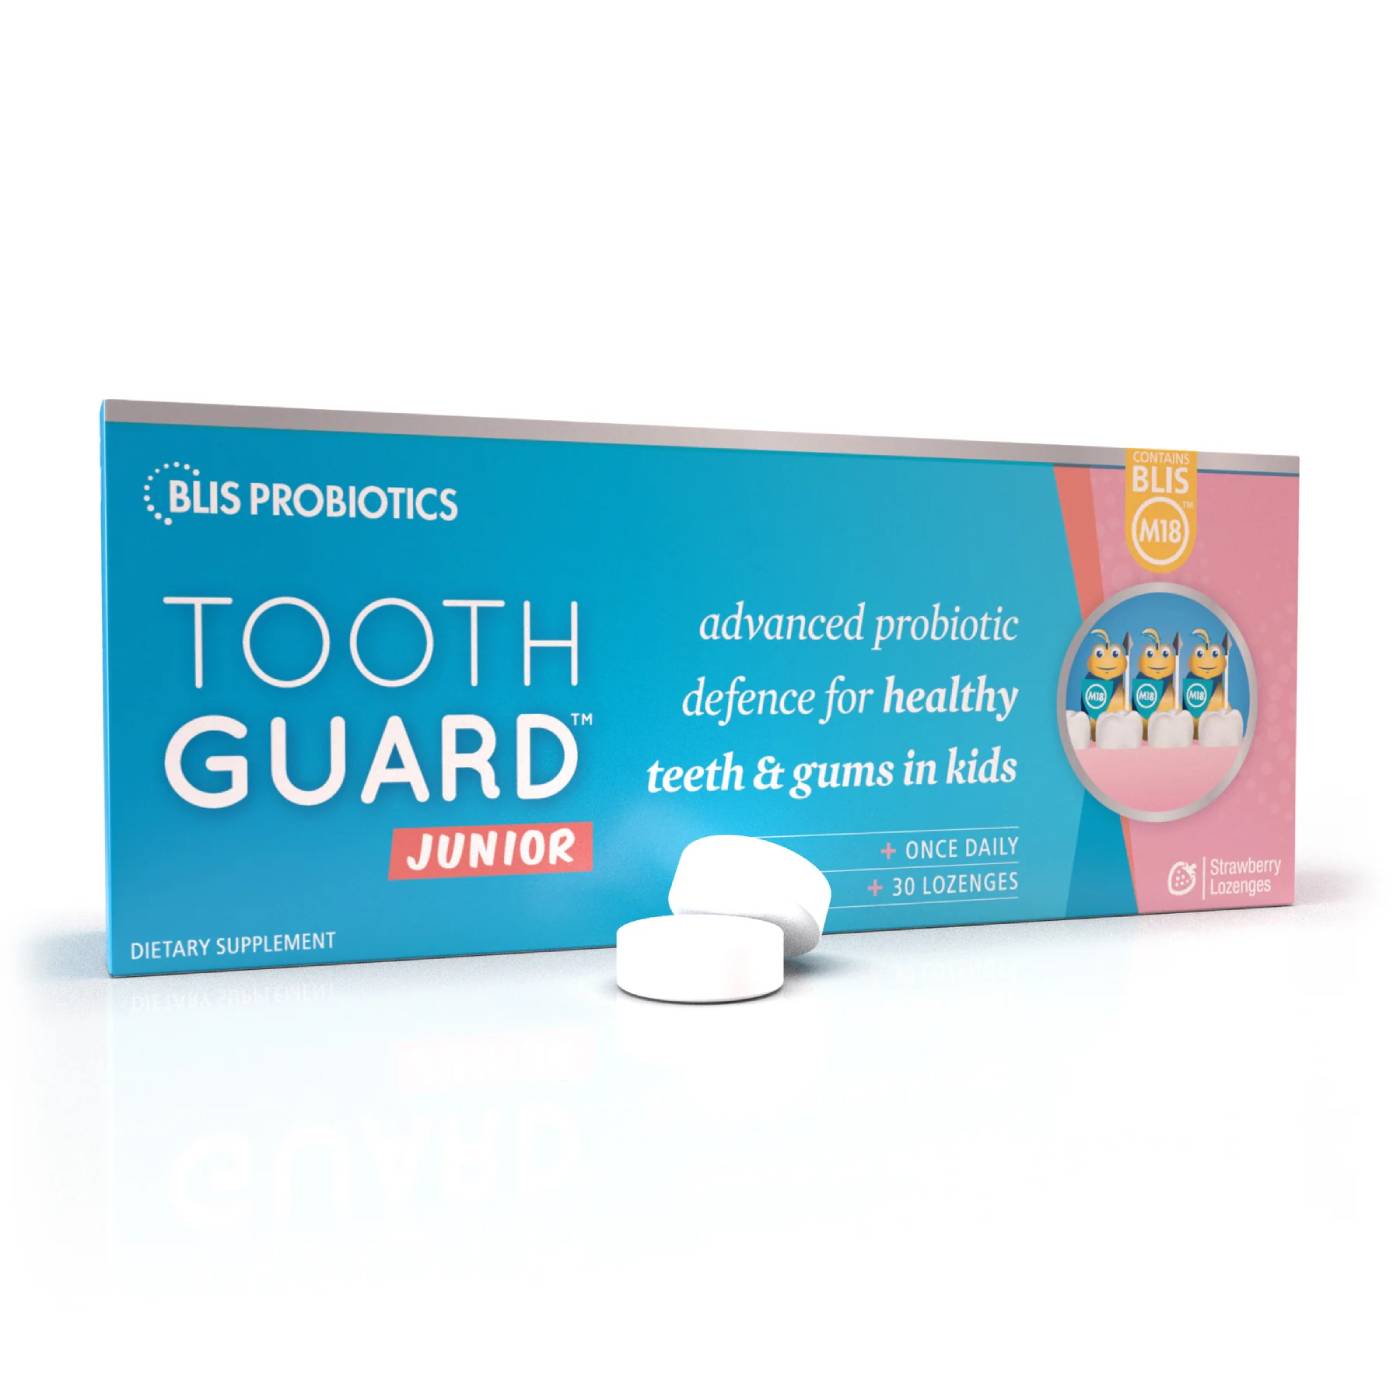 Tooth Guard Junior - advanced probiotic defence for healthy teeth & gums in kids